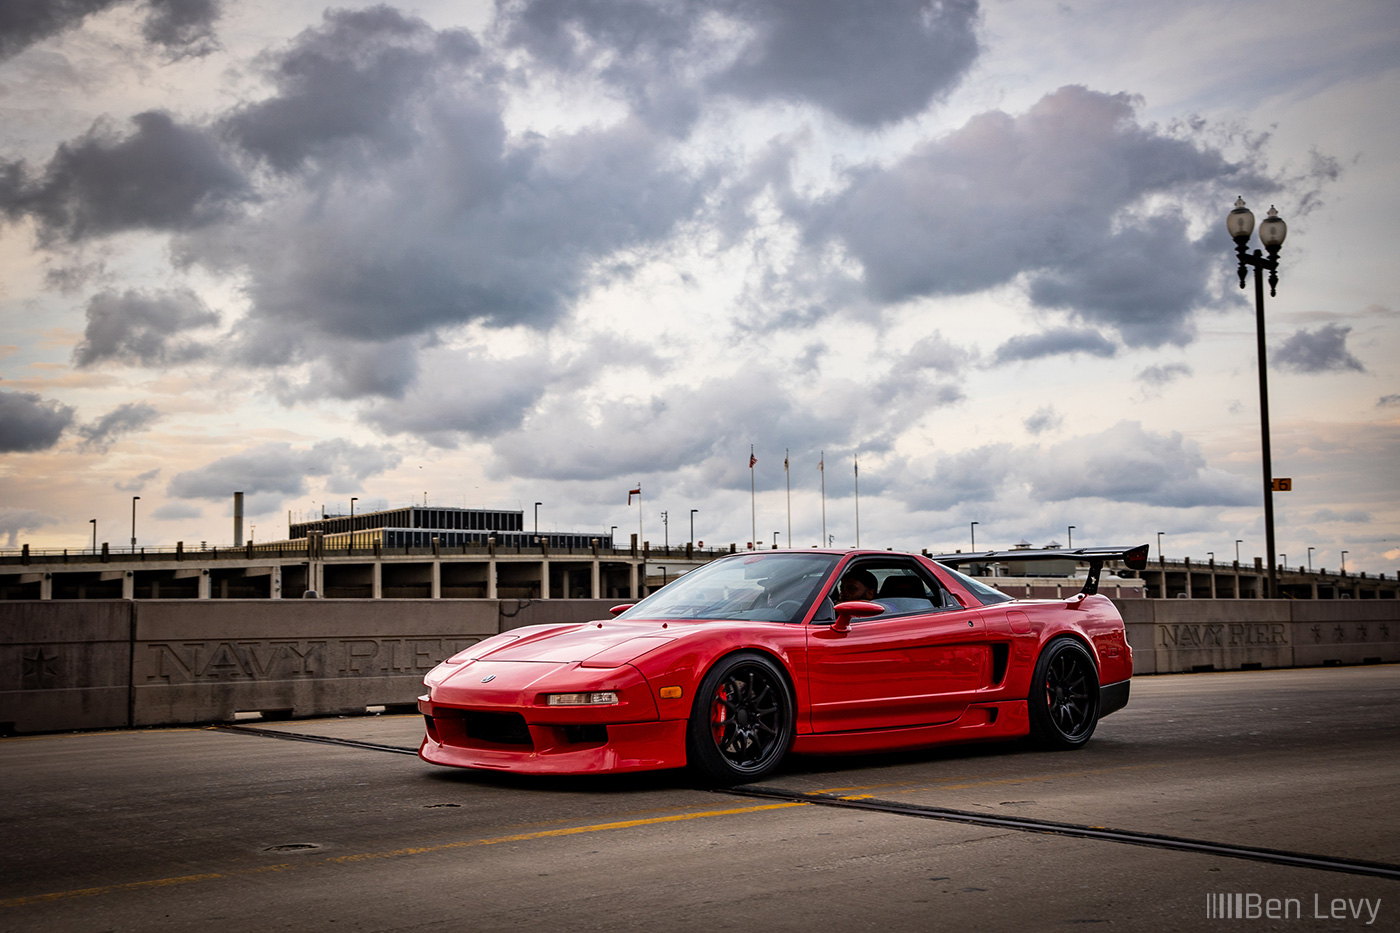 Red Acura NSX Leaving Wekfest at Navy Pier